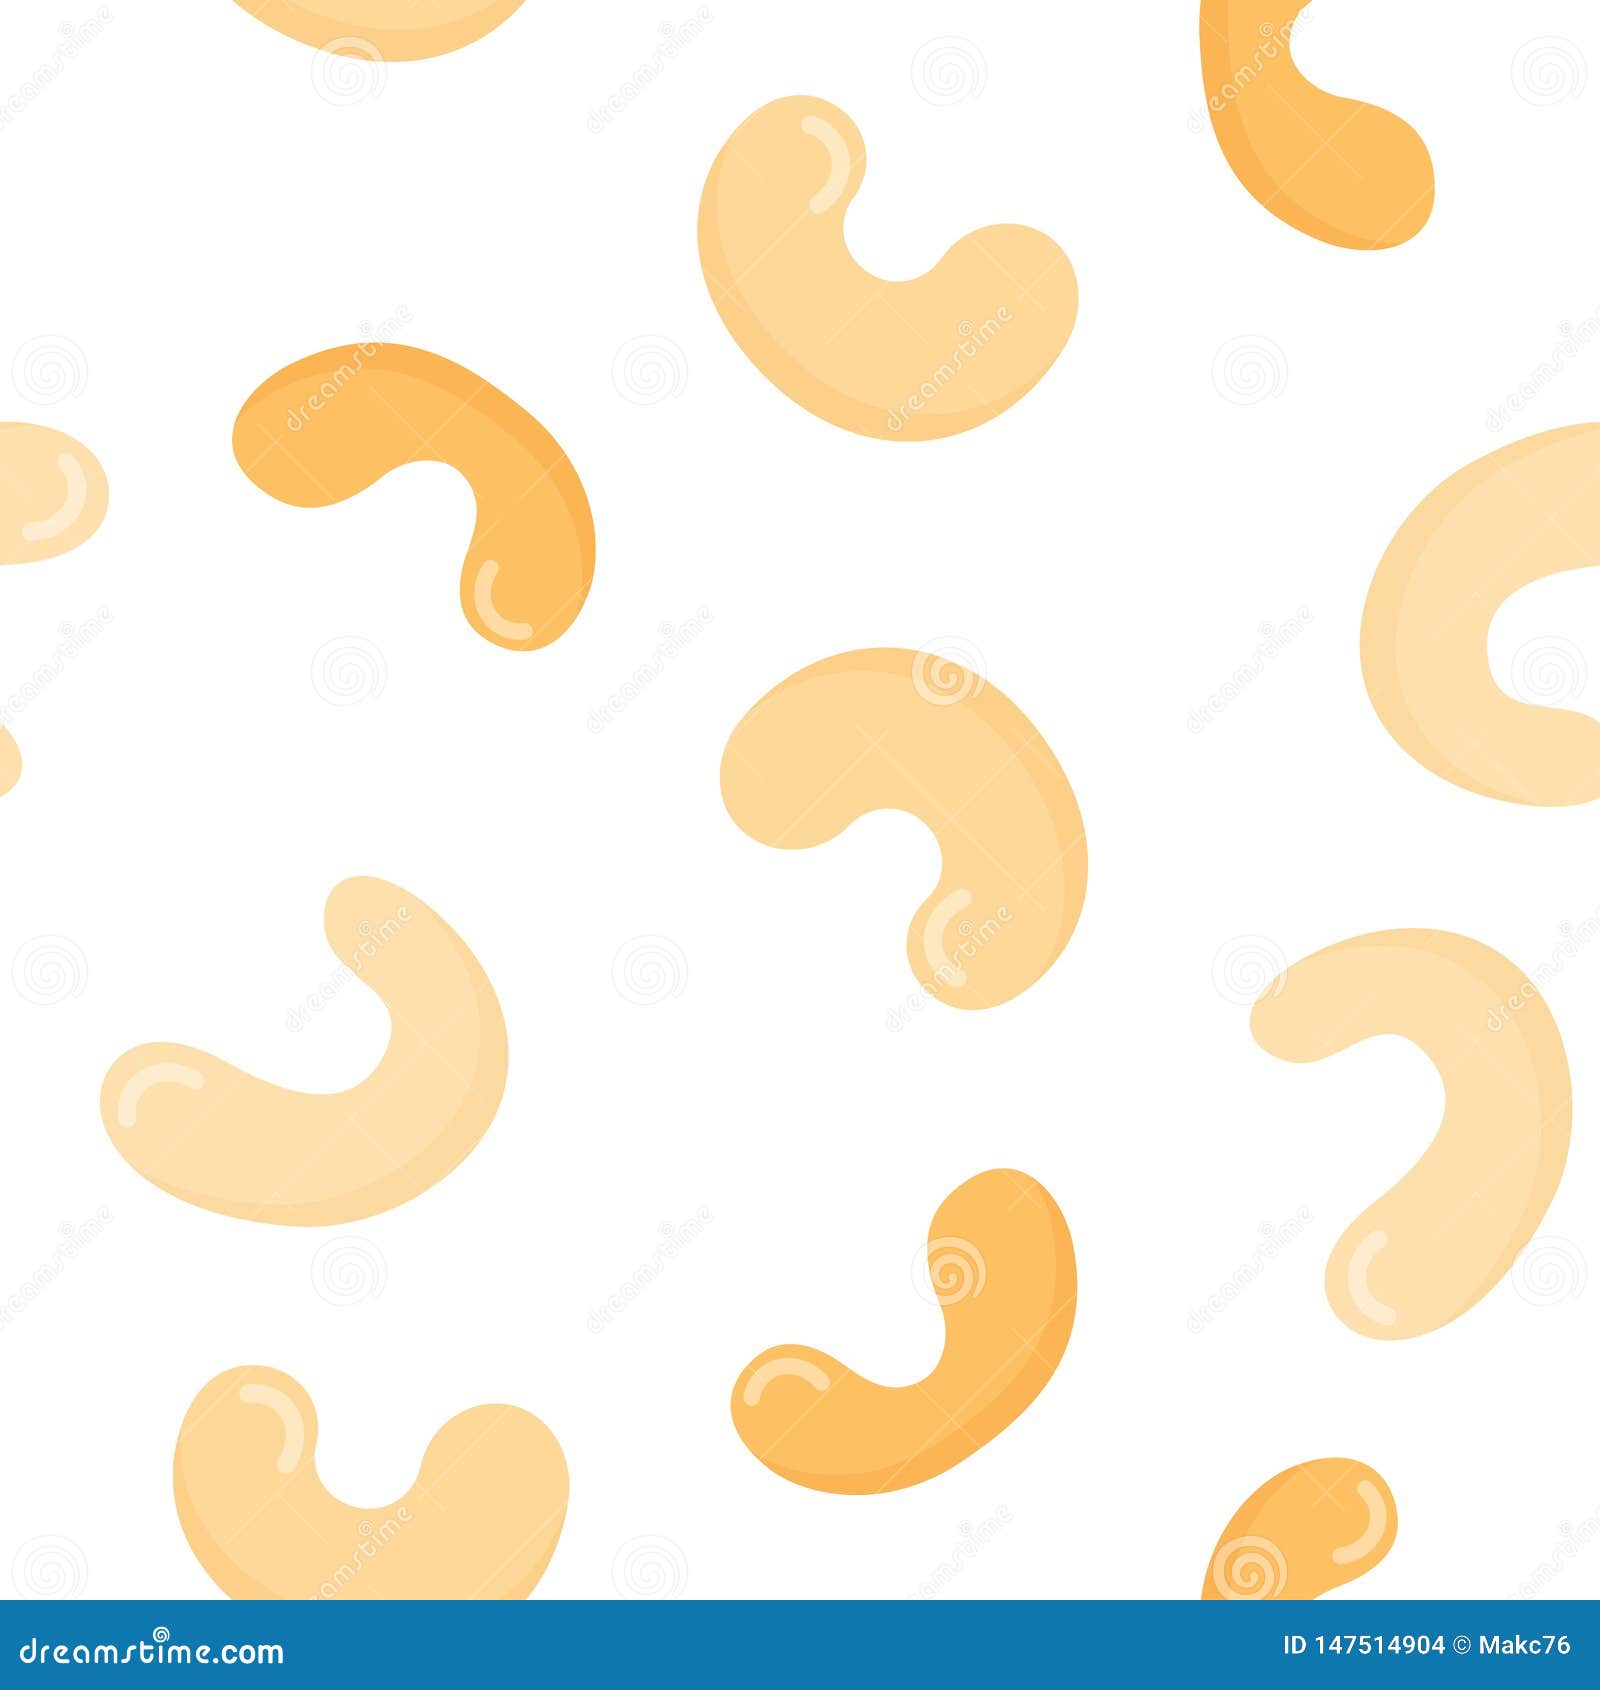 Cashew Nuts Seamless Pattern On White Background Stock ...